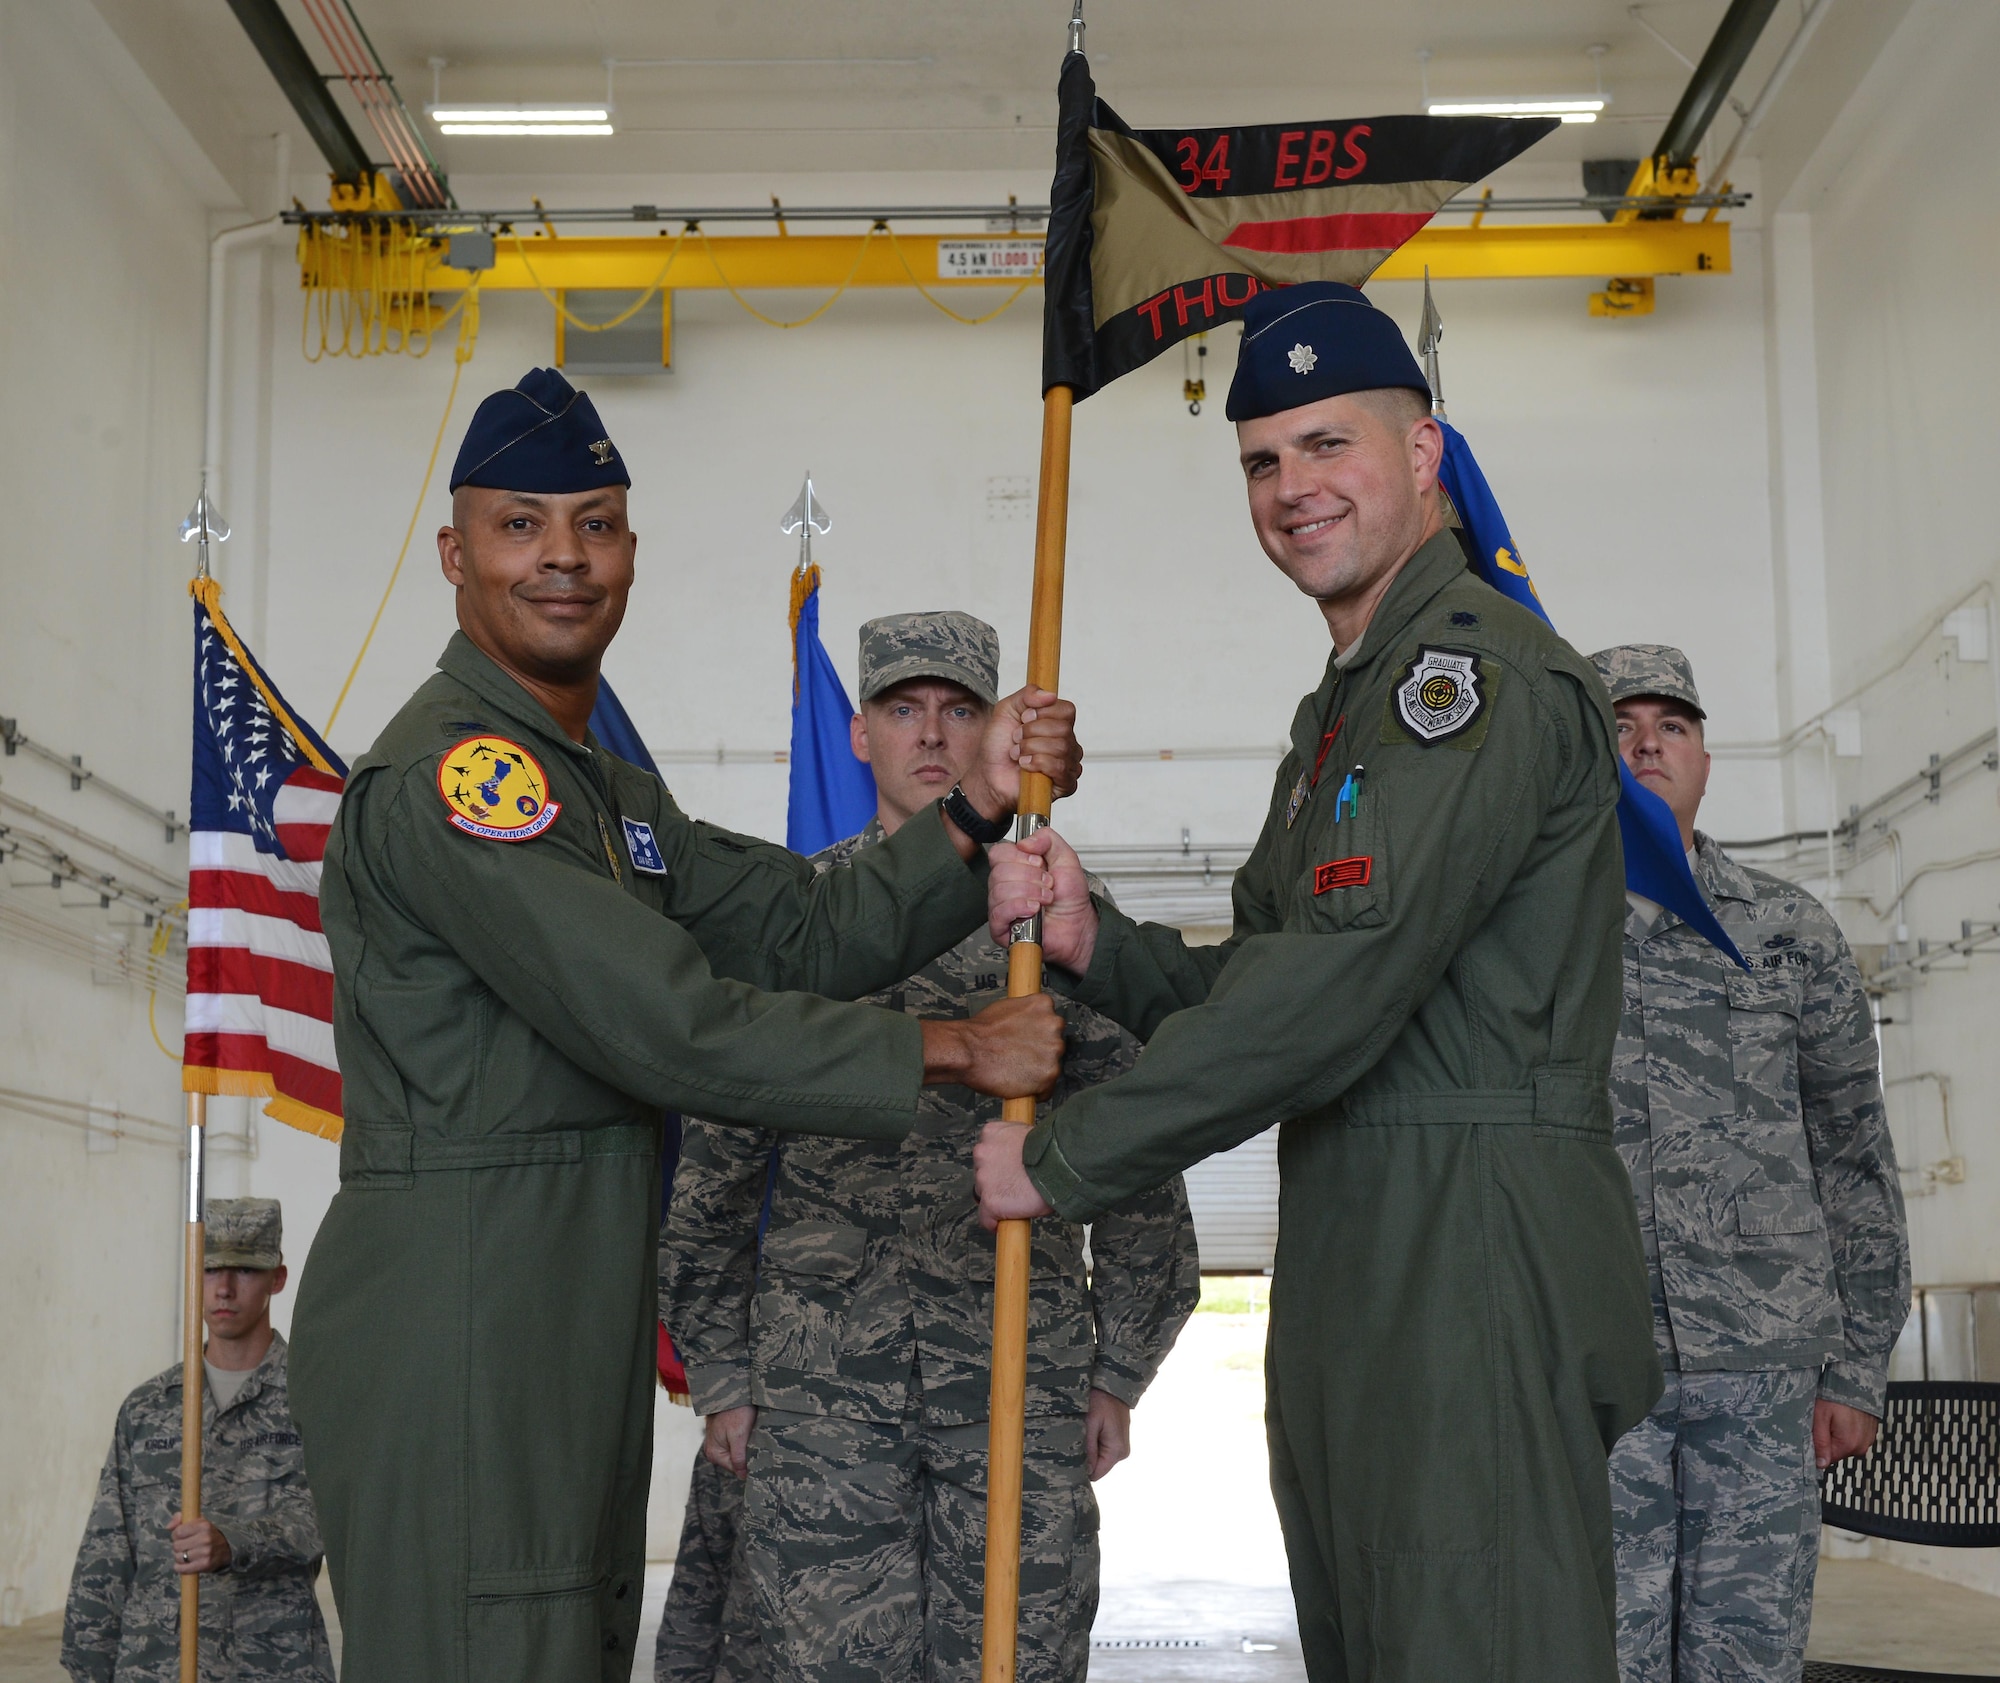 Lt. Col. Seth Spanier, right, 34th Expeditionary Bomb Squadron commander, accepts the 34th EBS guidon from Col. Samuel G. White III, 36th Operations Group commander, during a transfer of authority ceremony at Andersen Air Force Base, Guam, Aug. 15, 2016. The ceremony solidified the responsibility of the U.S. Pacific Command’s Continuous Bomber Presence being passed from the 69th EBS from Minot Air Force Base, N.D., to the 34th EBS from Ellsworth Air Force Base, S.D. (U.S. Air Force photo by Airman 1st Class Arielle Vasquez)